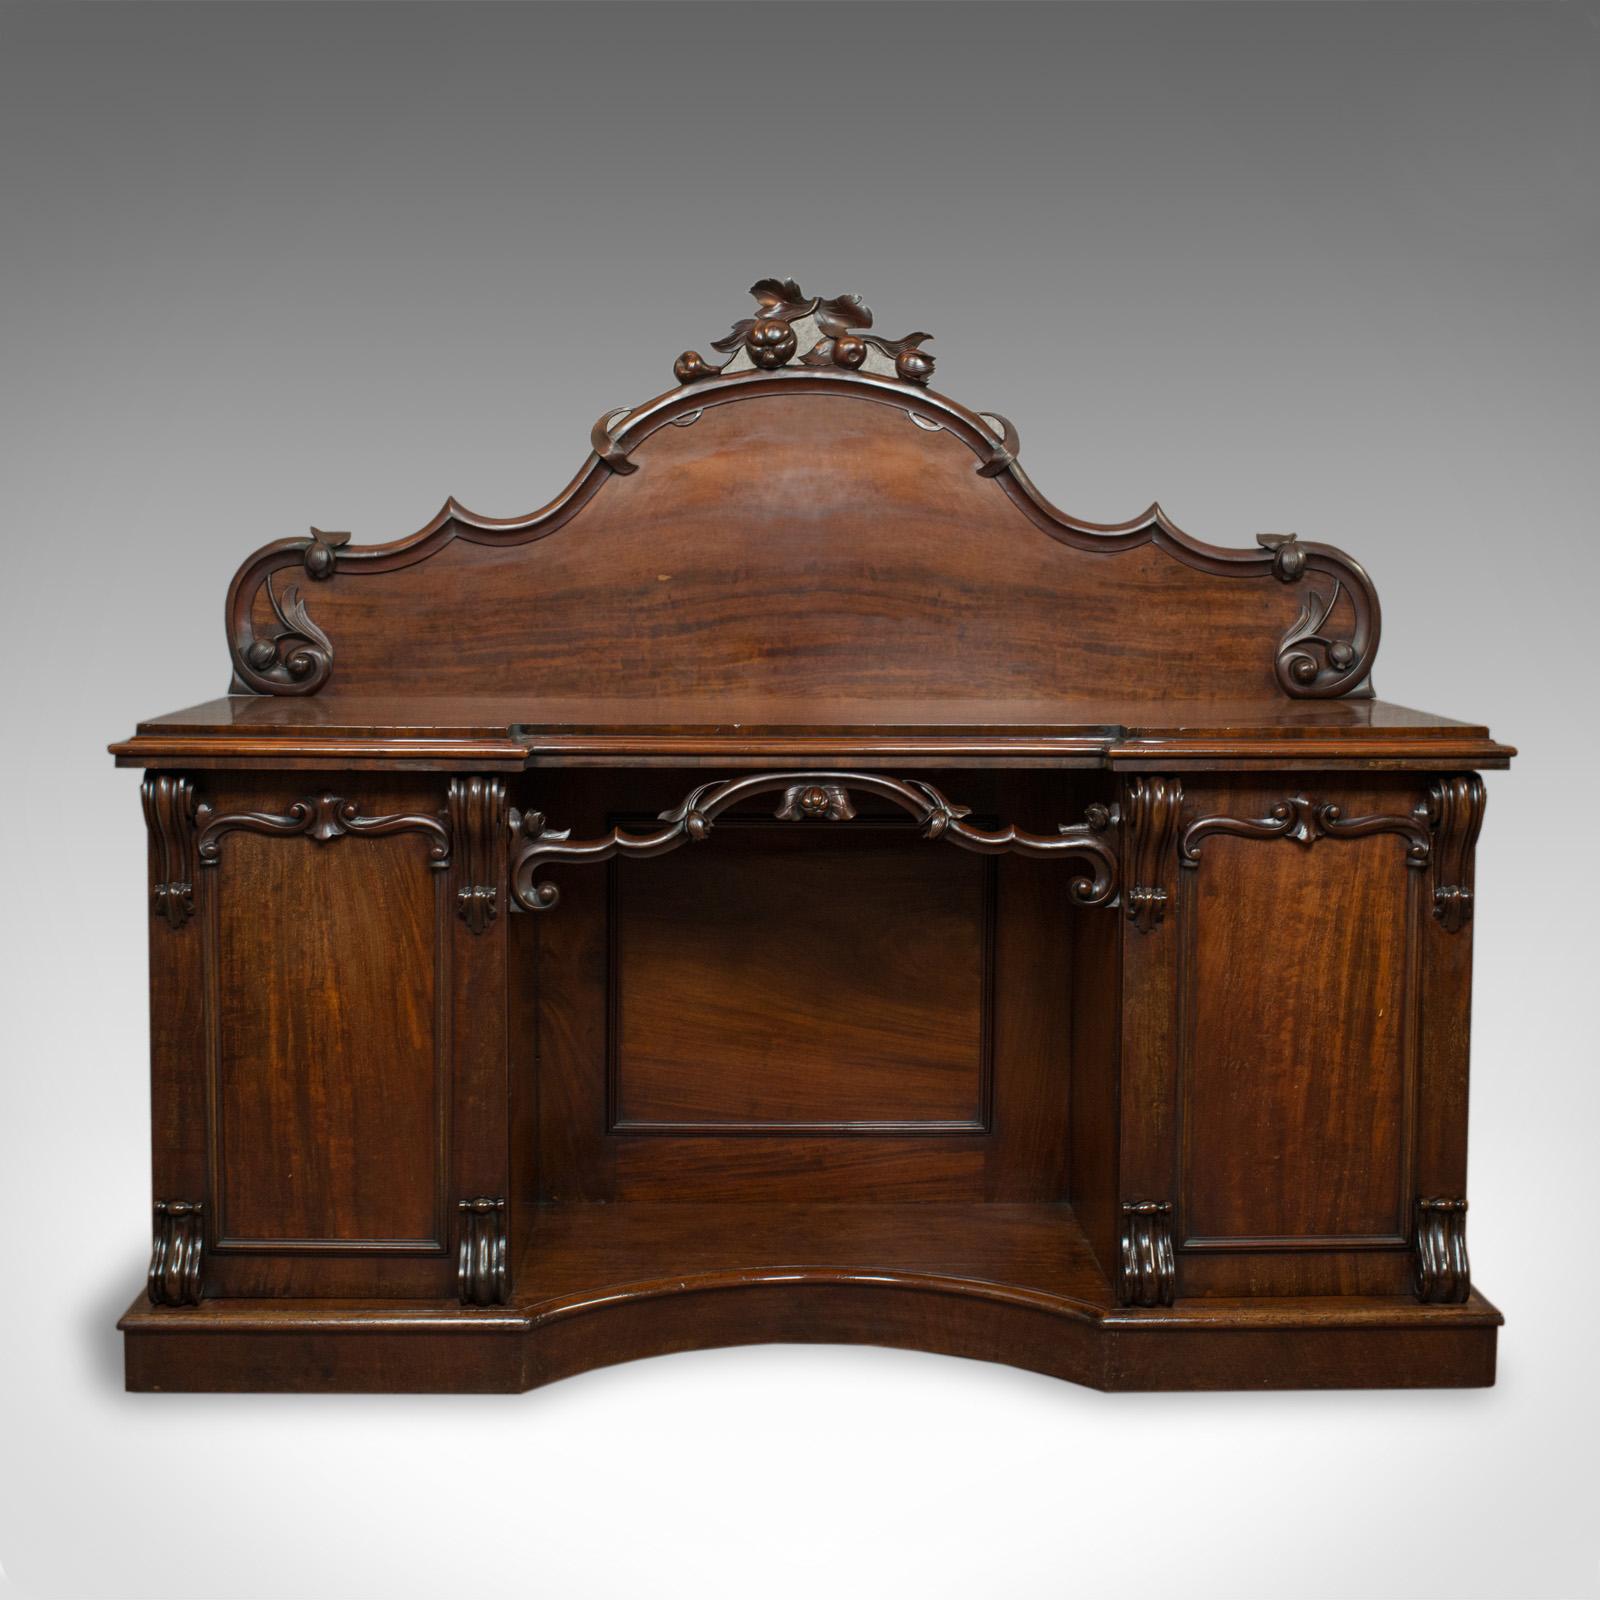 This is a large antique sideboard. An English, Victorian mahogany dresser dating to the mid-19th century, circa 1850.

Resplendent in rich mahogany with fine grain interest
Good consistent color throughout and a desirable aged patina
Deep russet